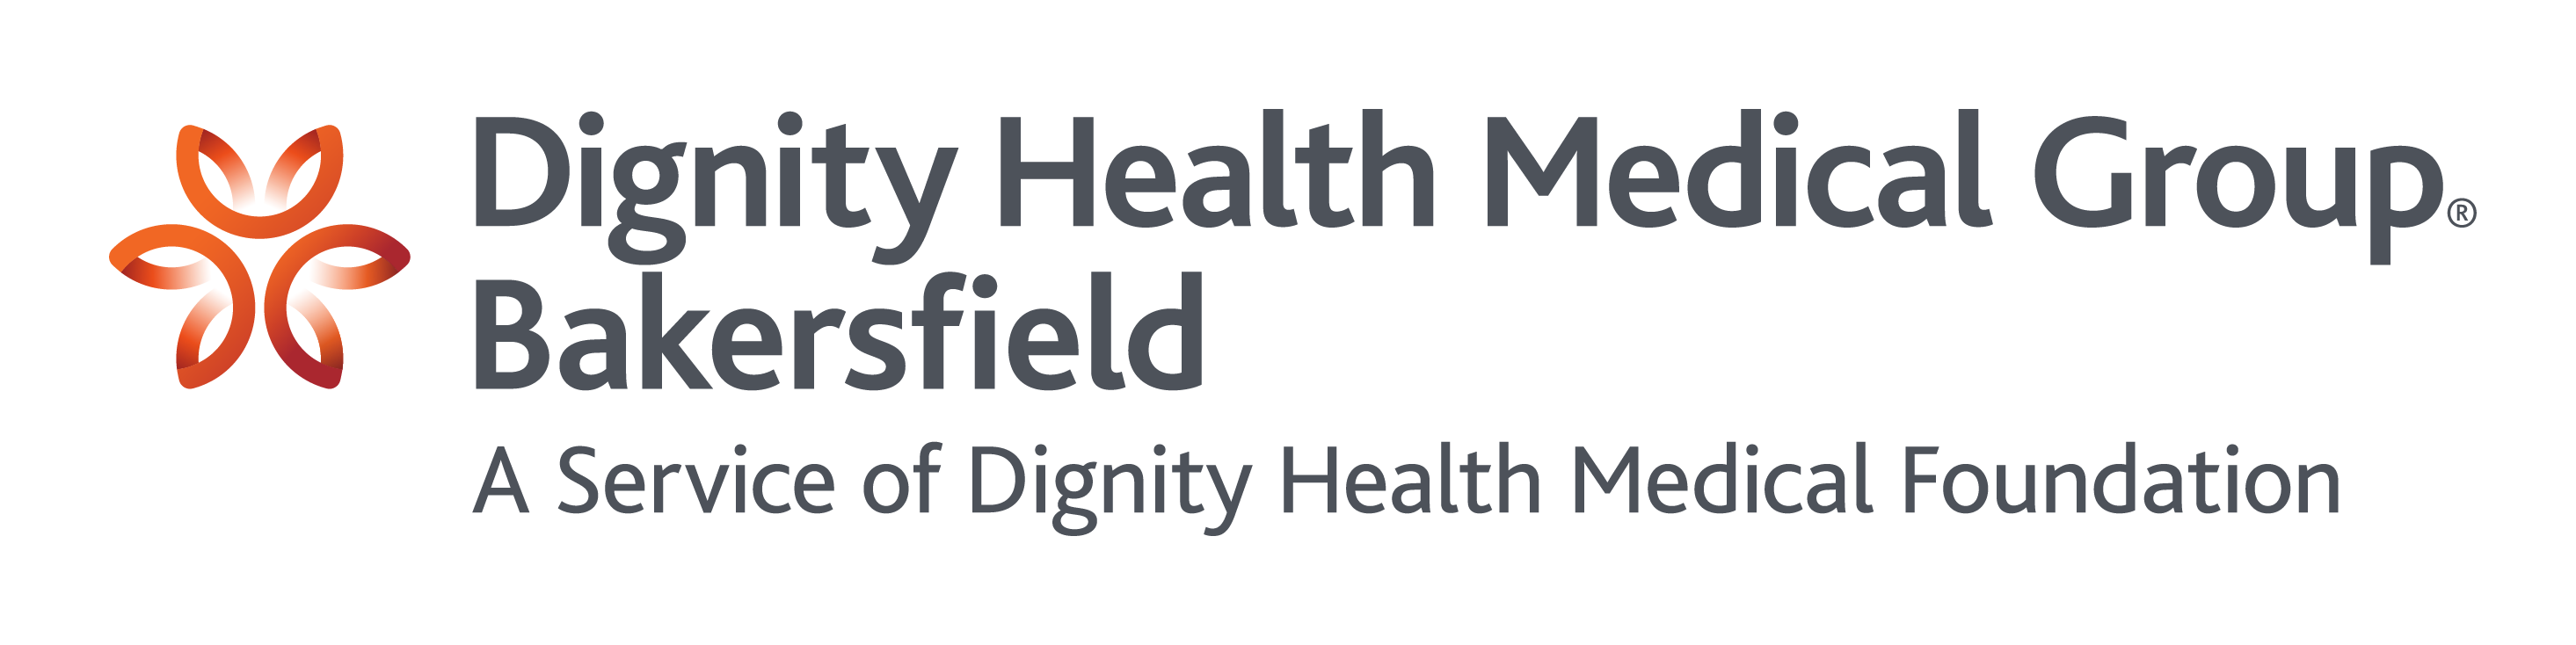 Primary Care Nurse Practitioner - Dignity Health Medical Group - Bakersfield - Bakersfield